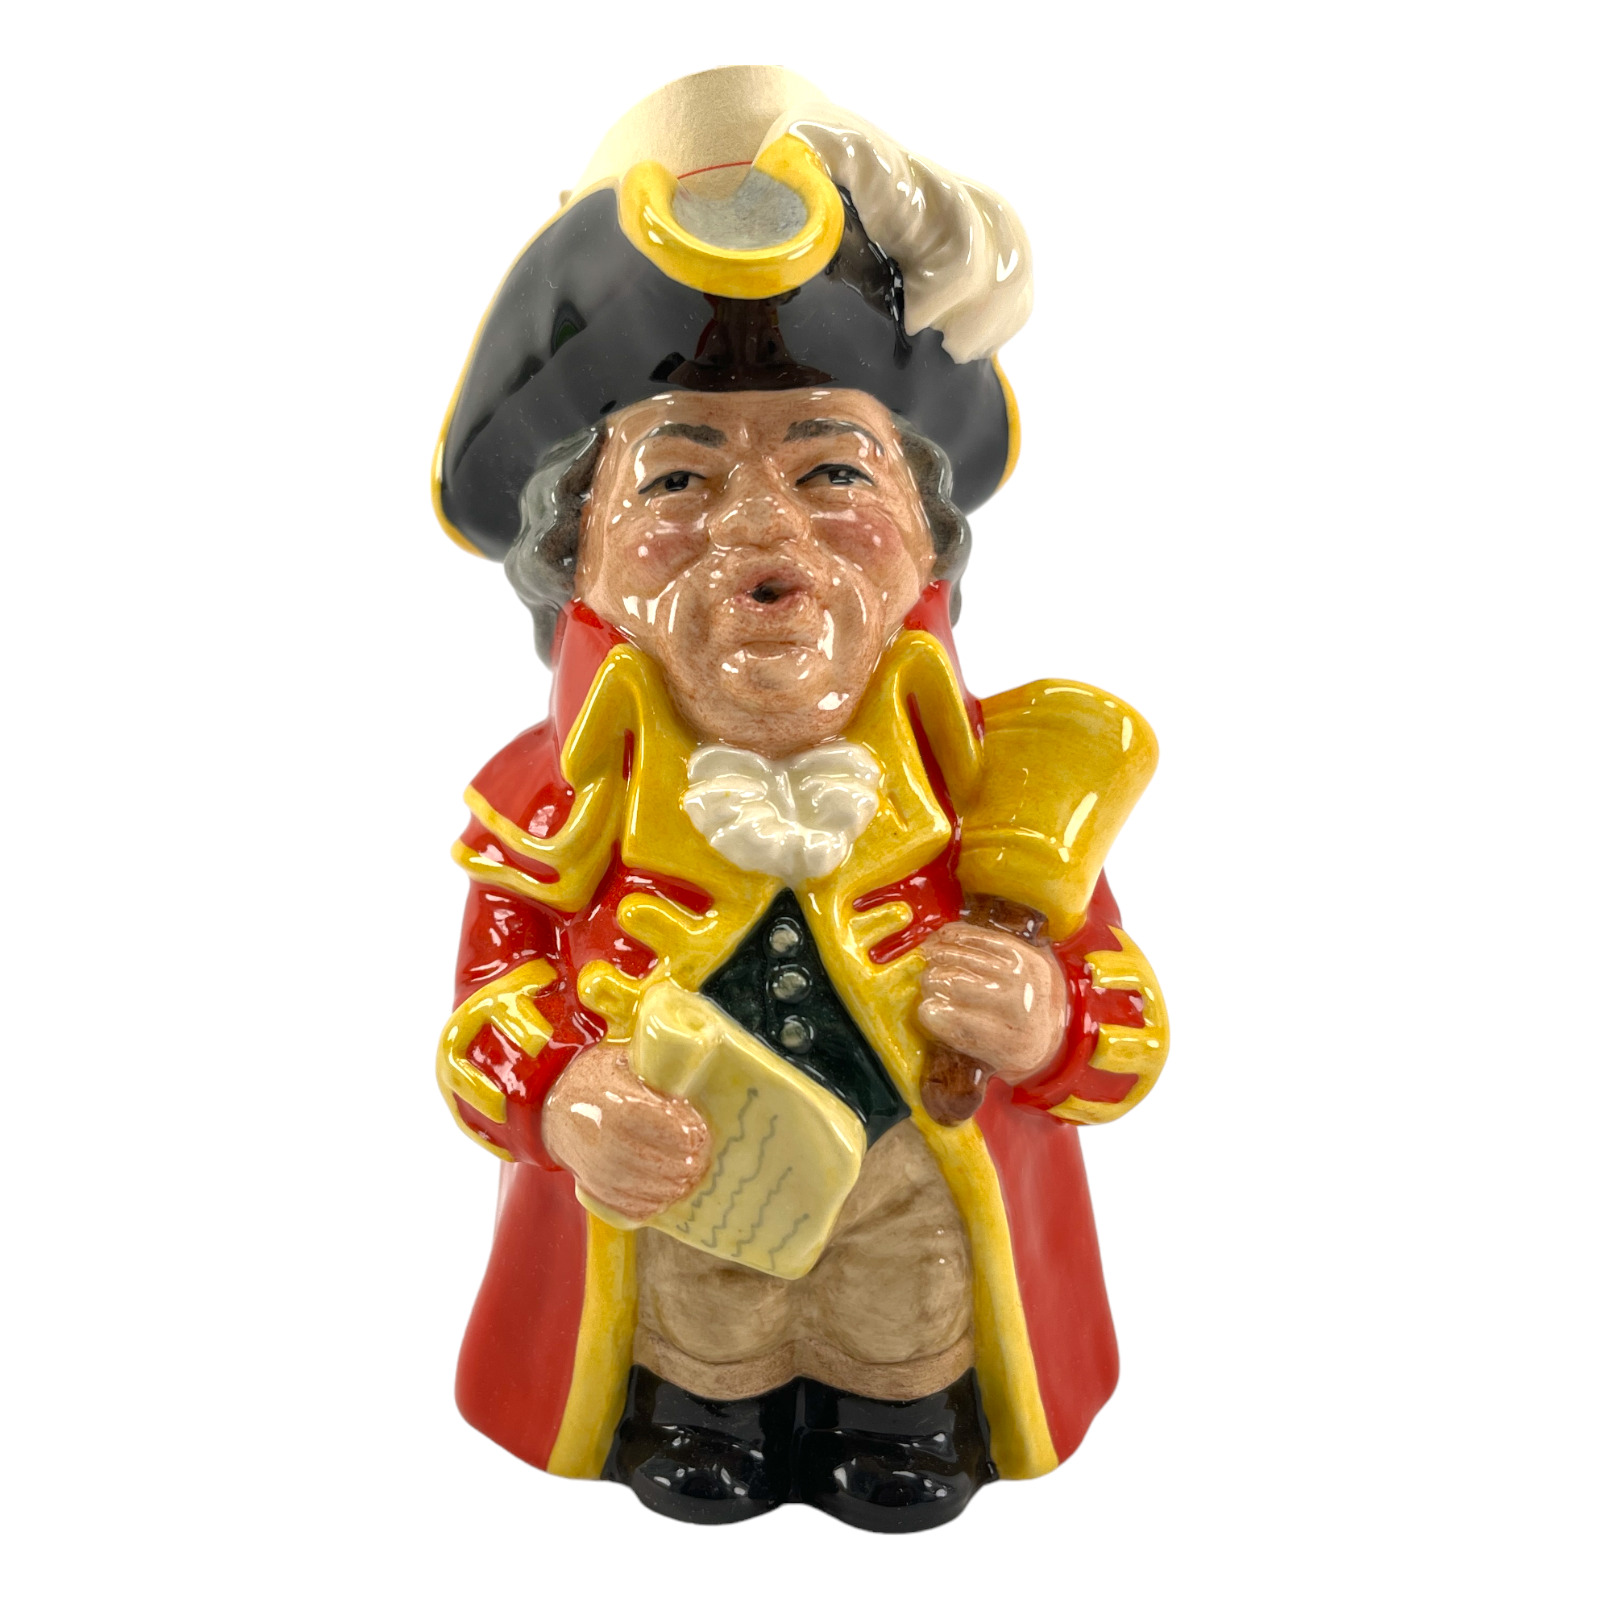 ROYAL DOULTON D6920 Toby Jug TOWN CRIER – Limited Edition 535/2500 COA Included